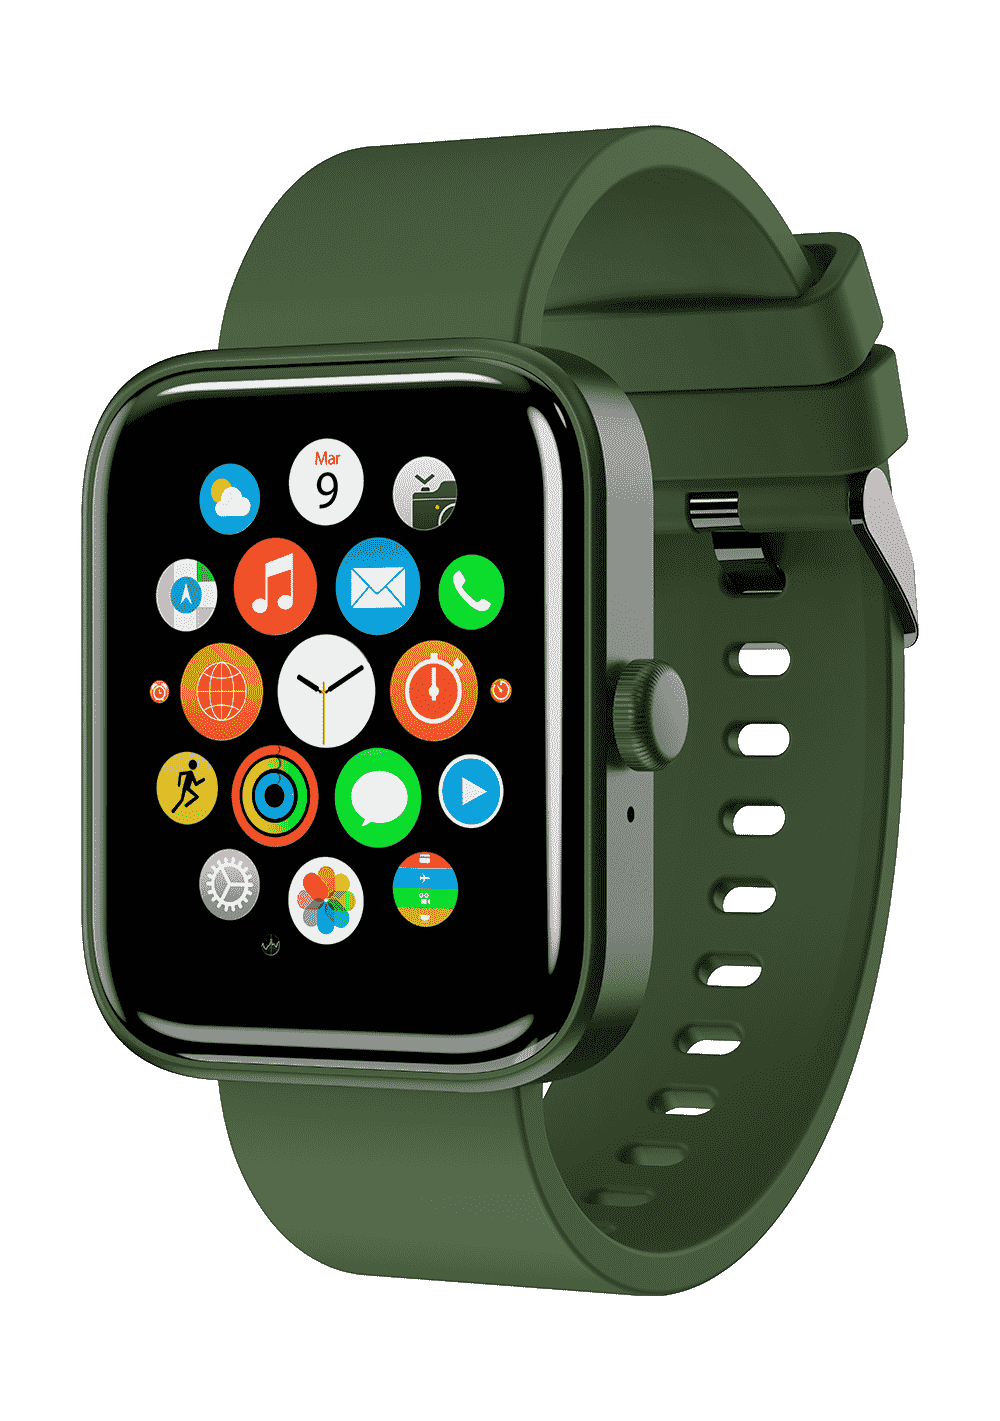 Crossbeats unveils Ignite Spectra smartwatch with AMOLED display